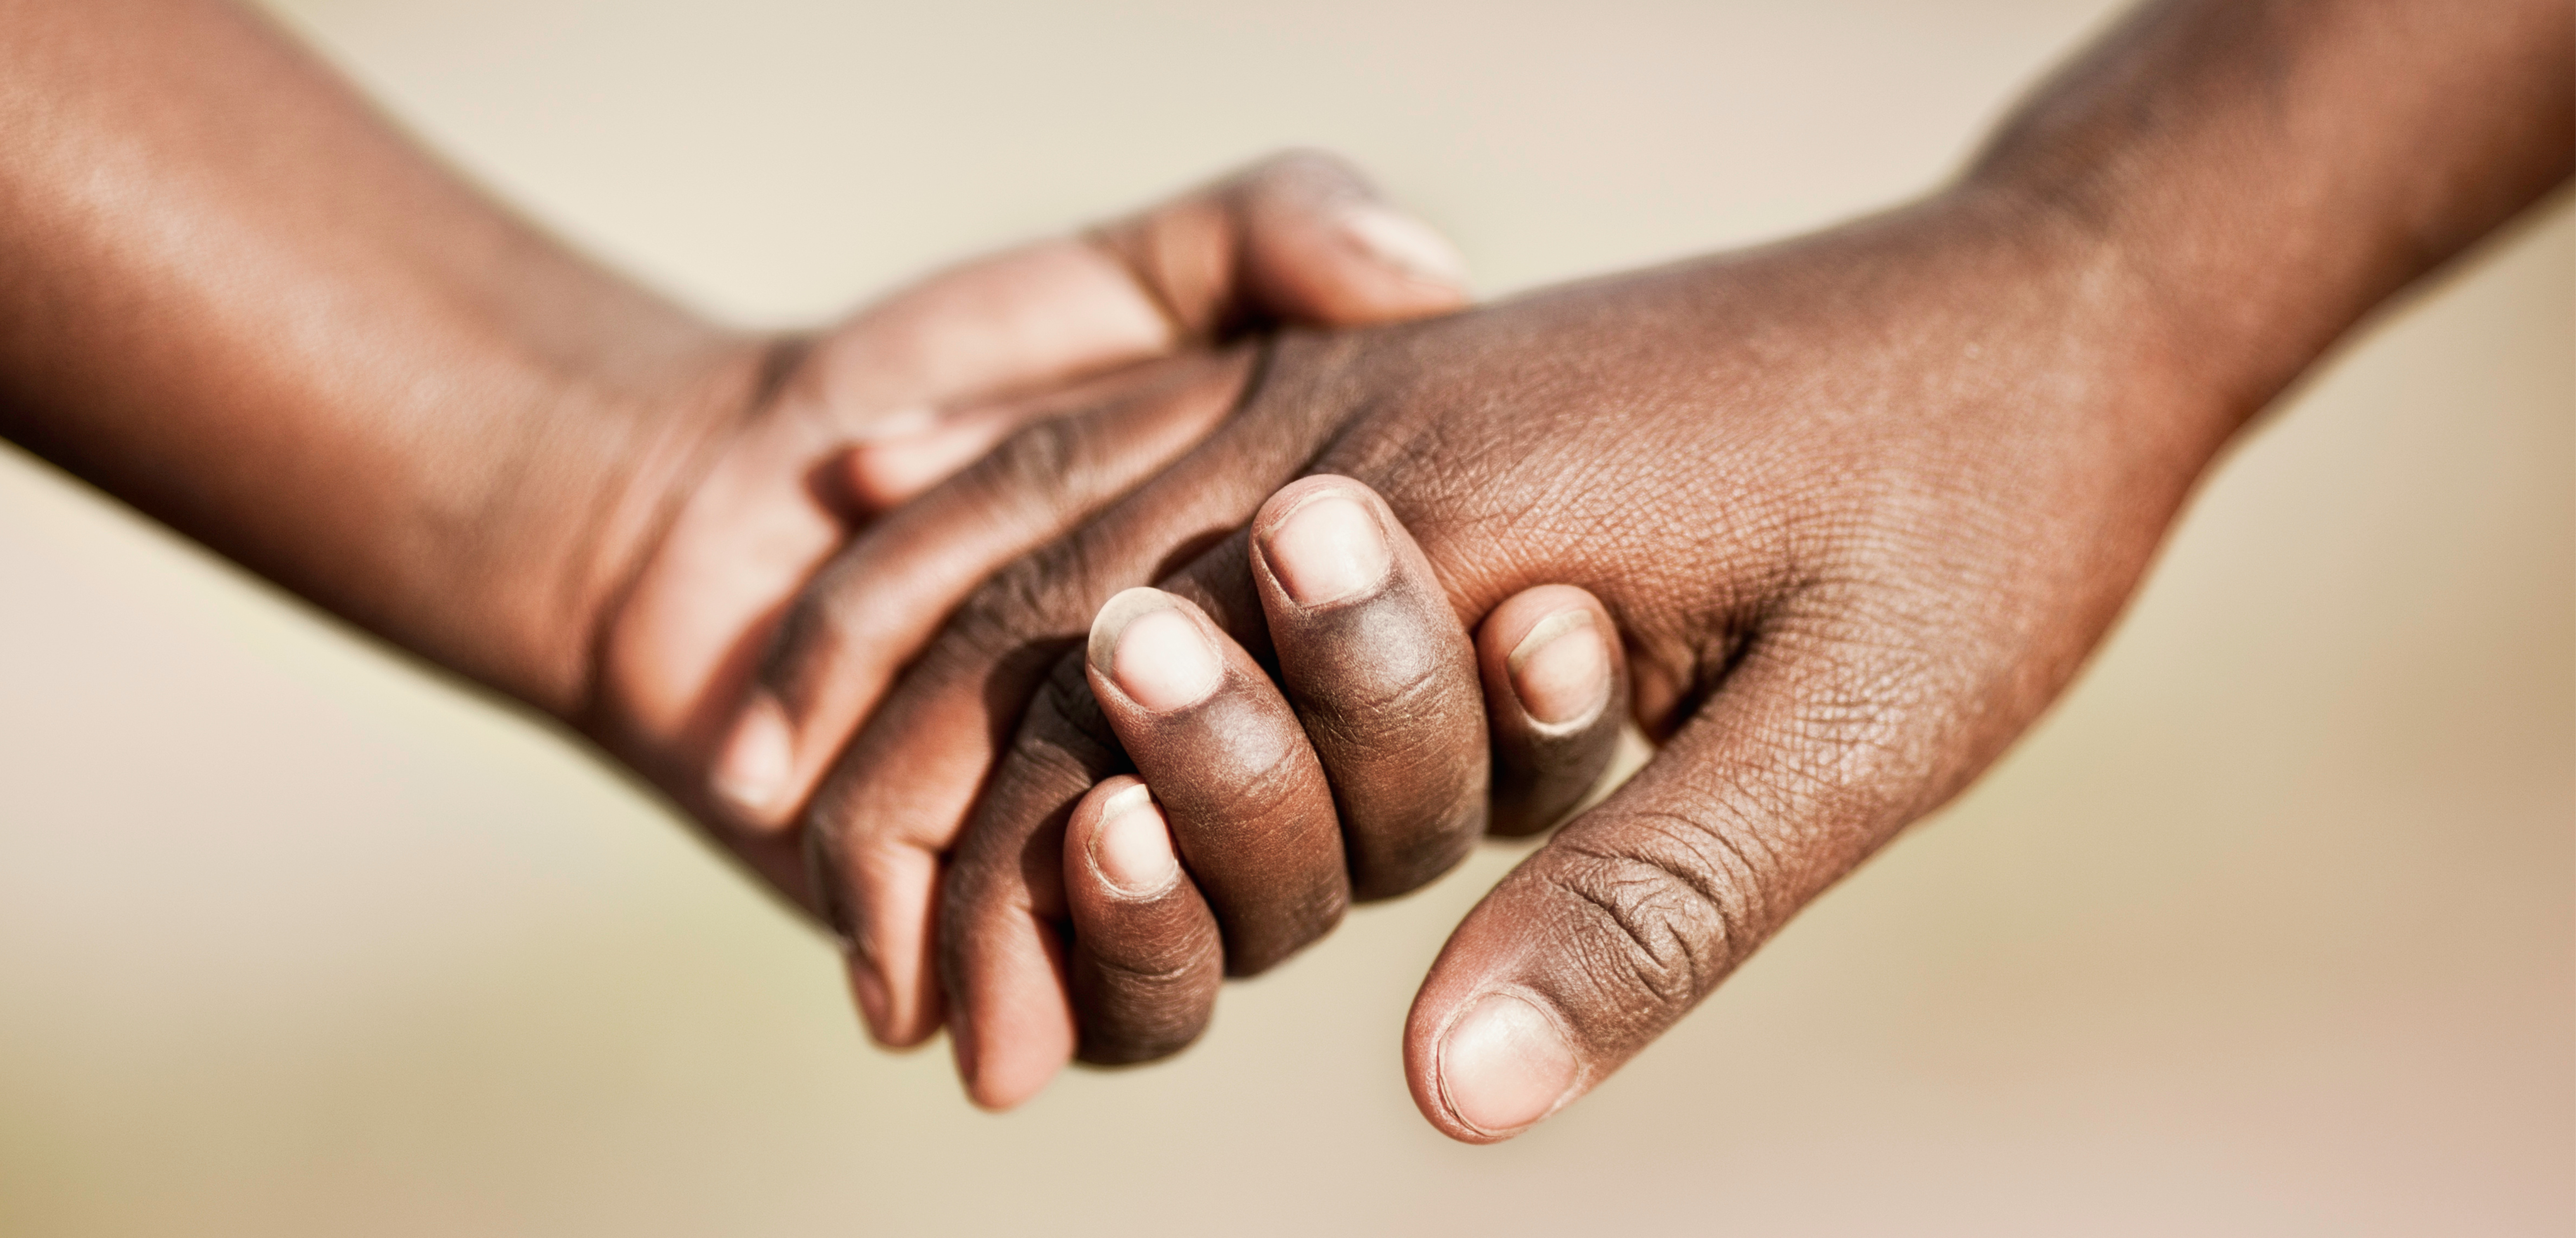 Image of two hands joining together